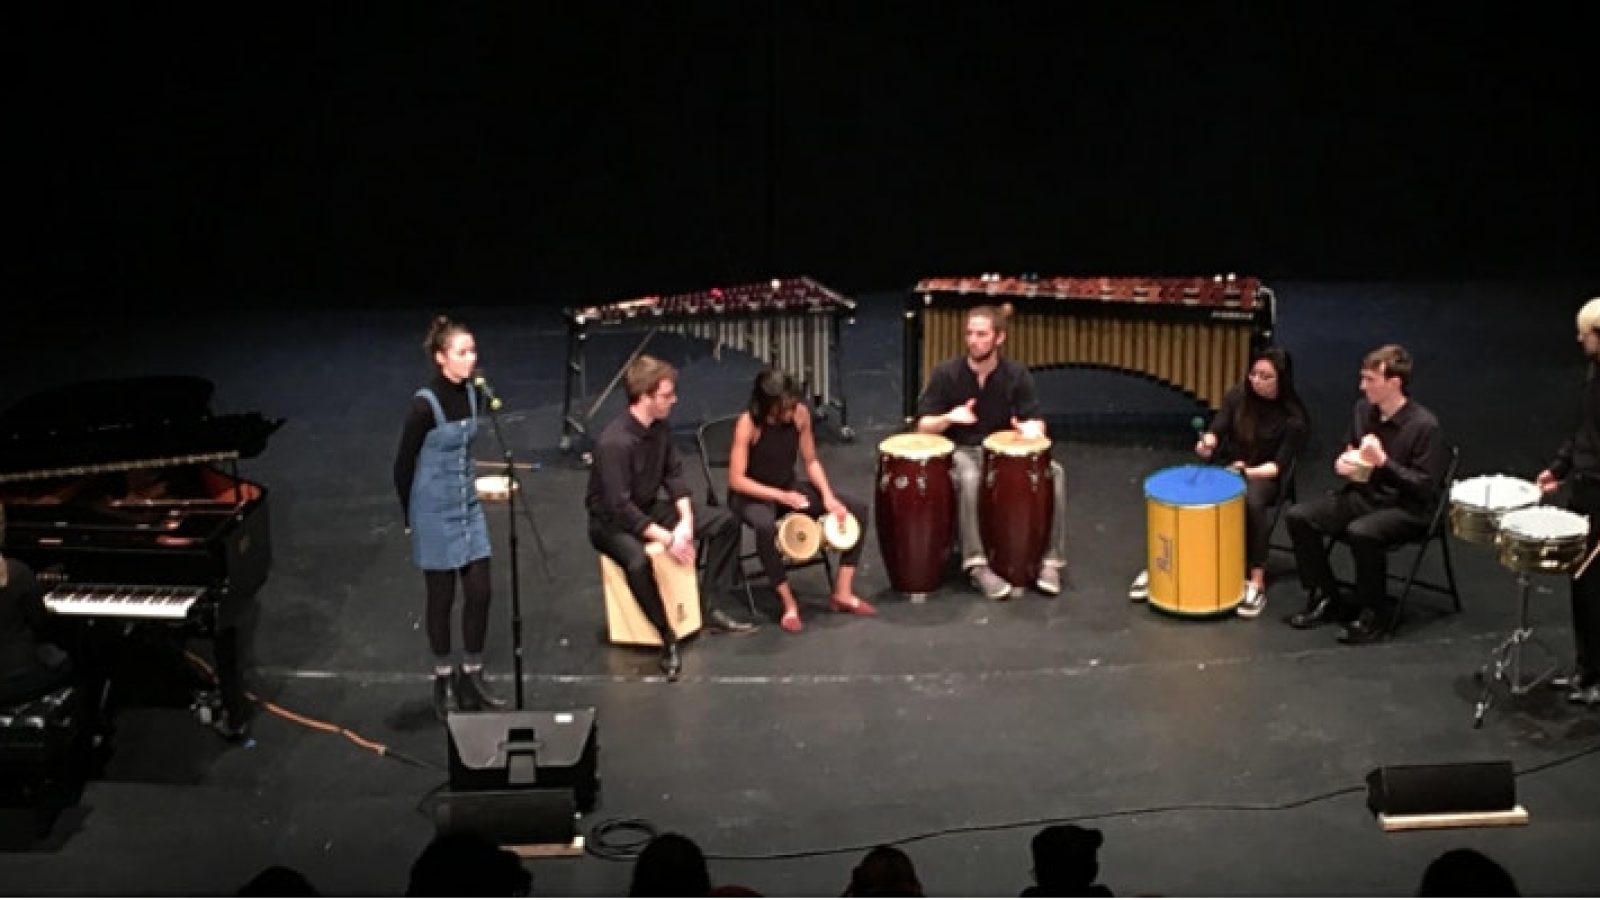 A group of students on stage with various musical instruments.